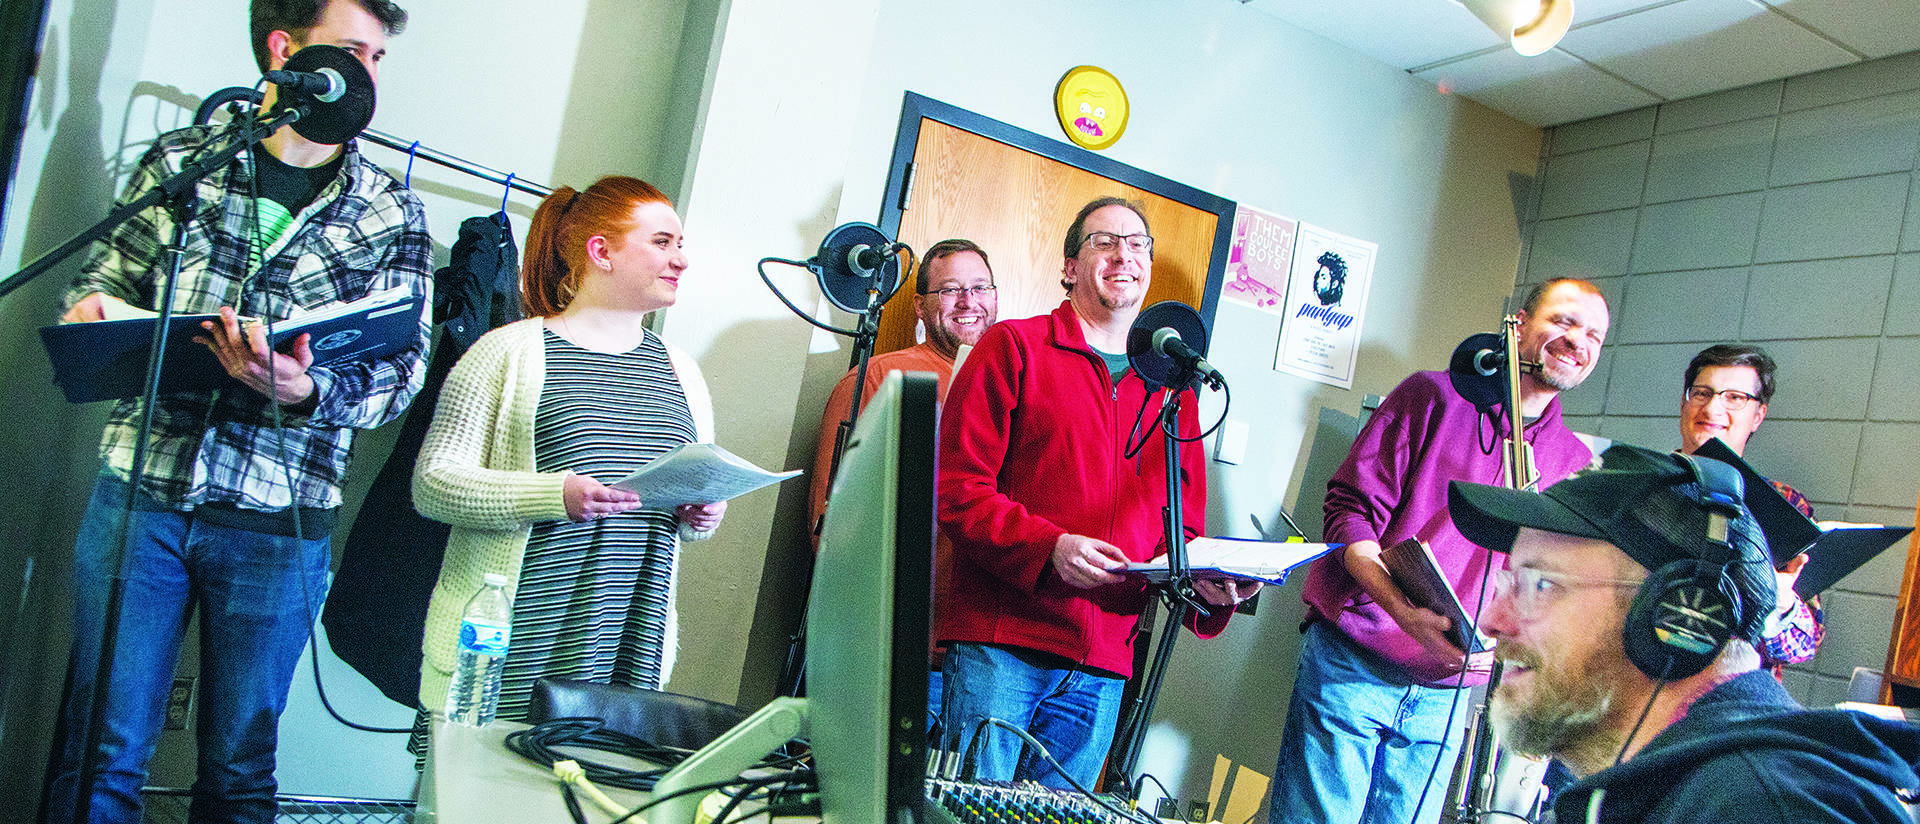 Cast recording "Bend in the River"